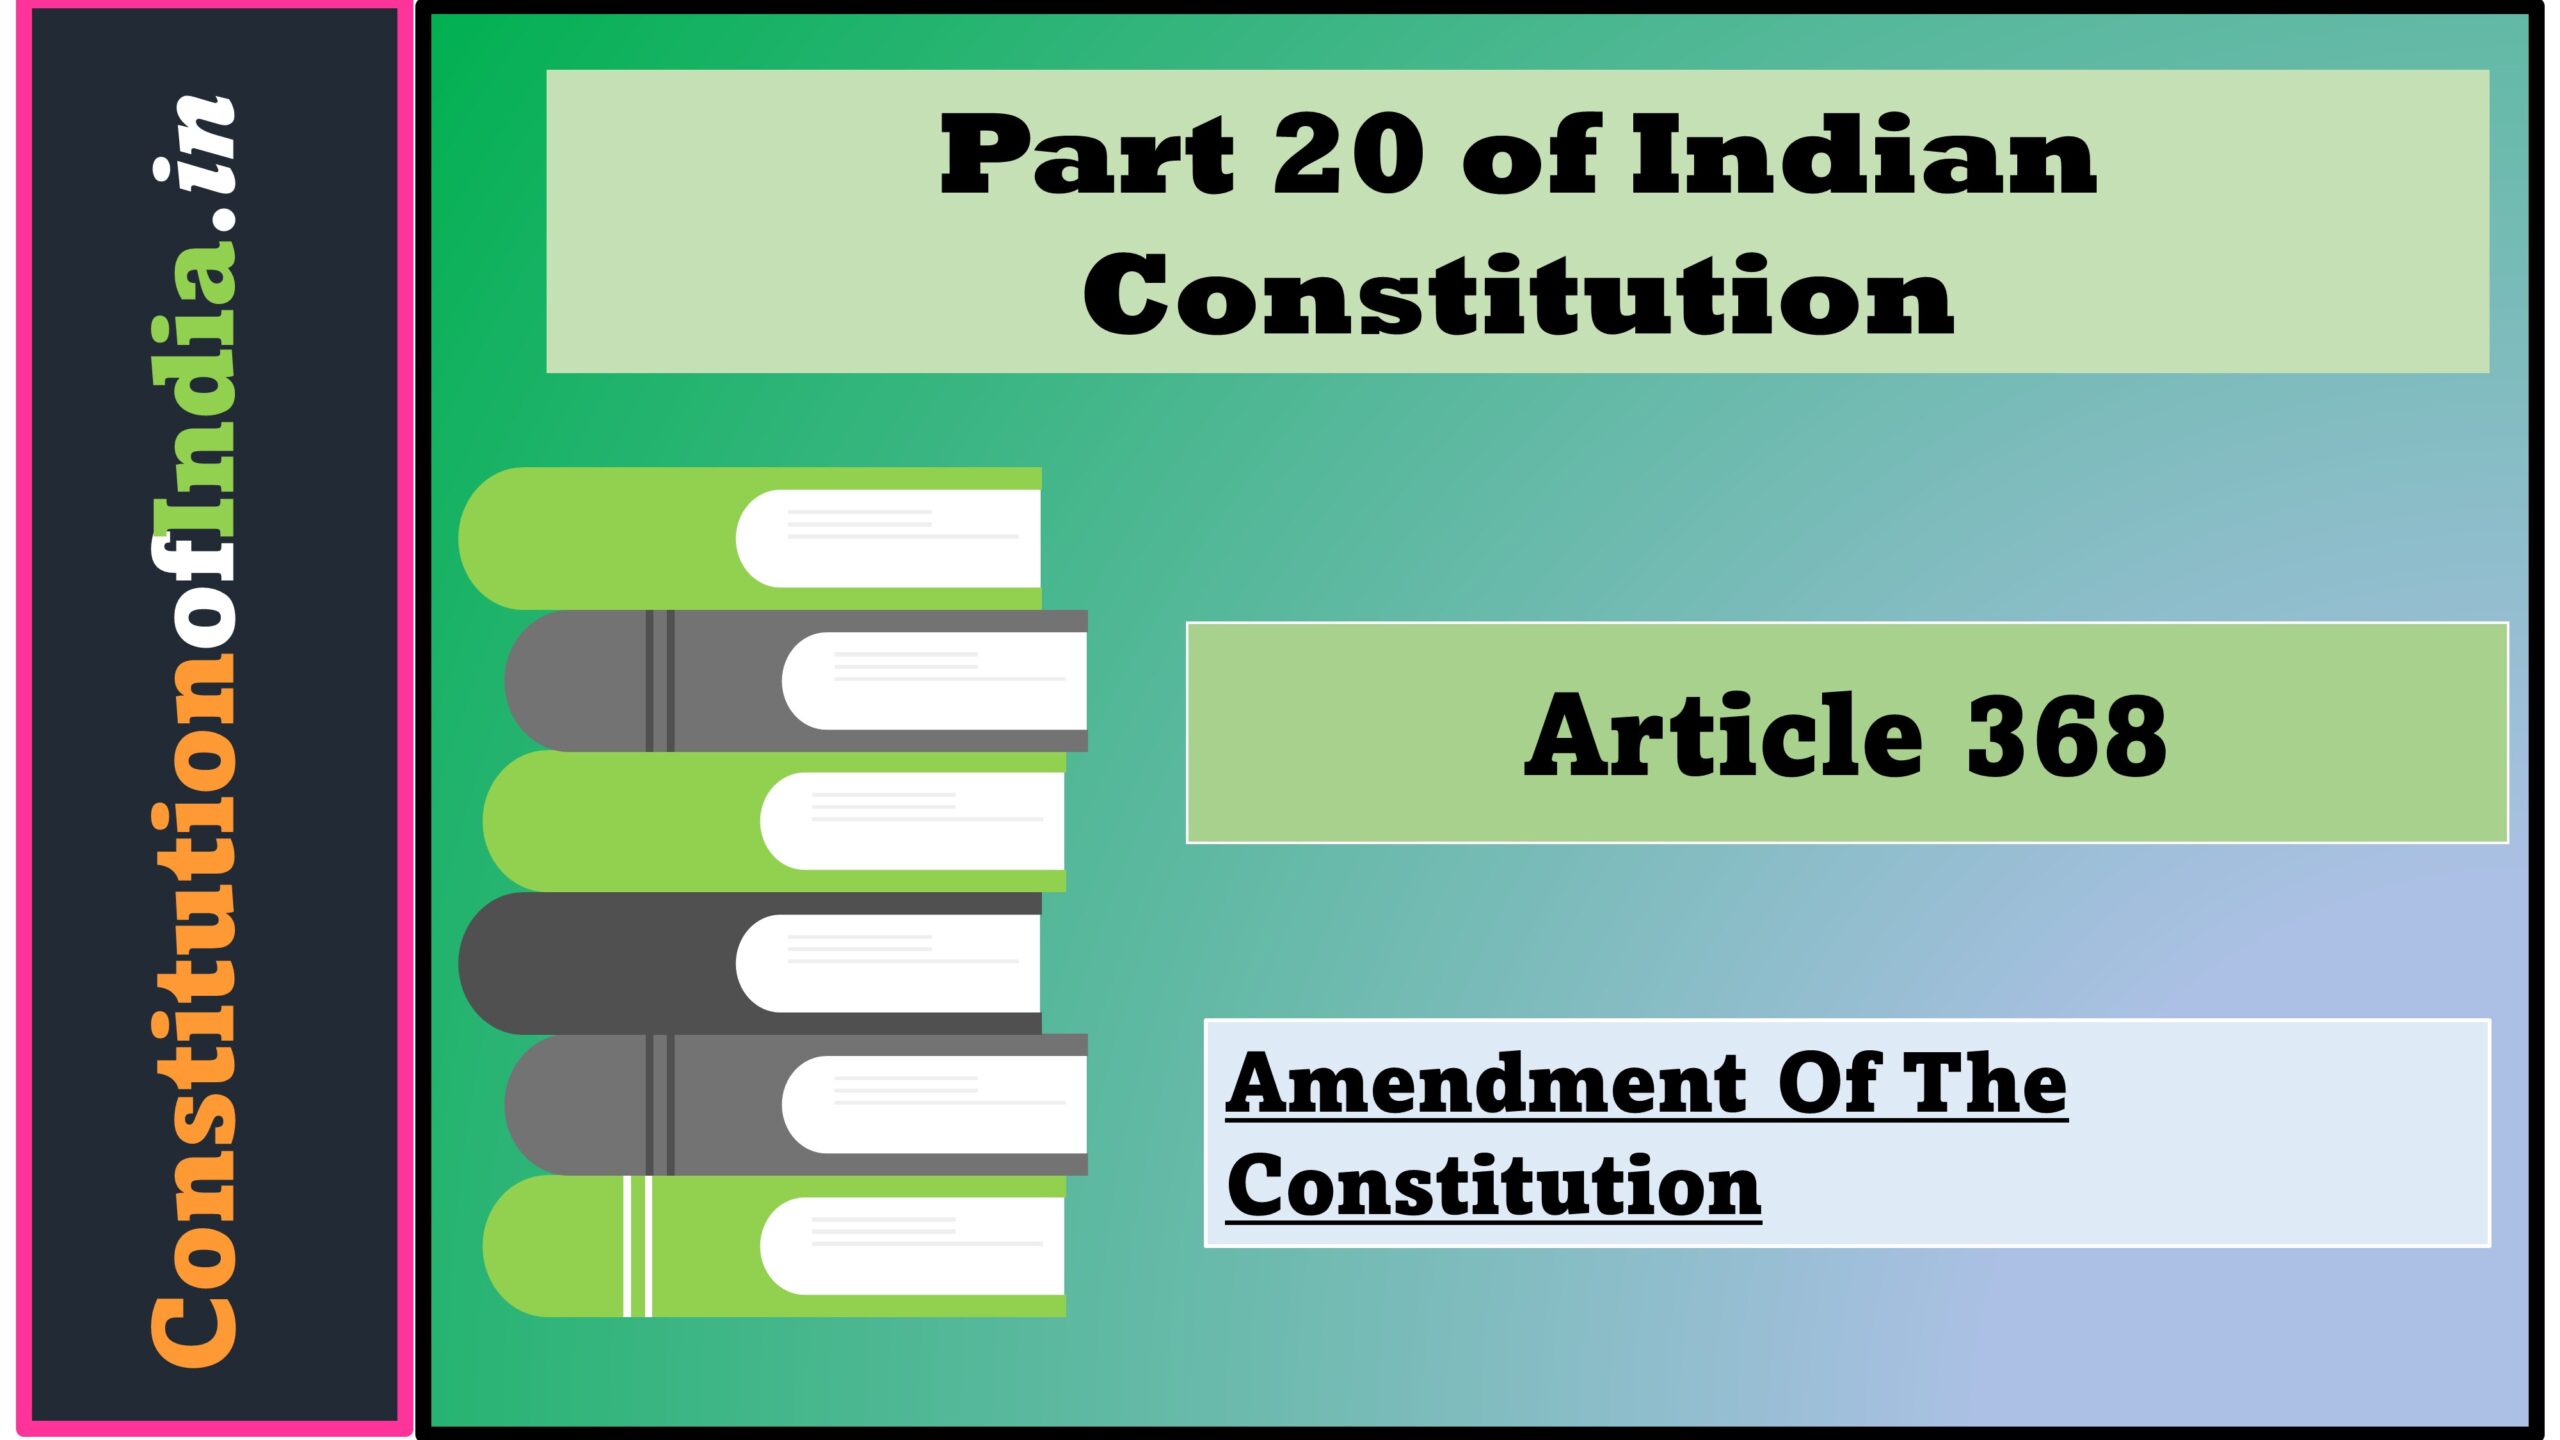 Part 20 of Indian Constitution